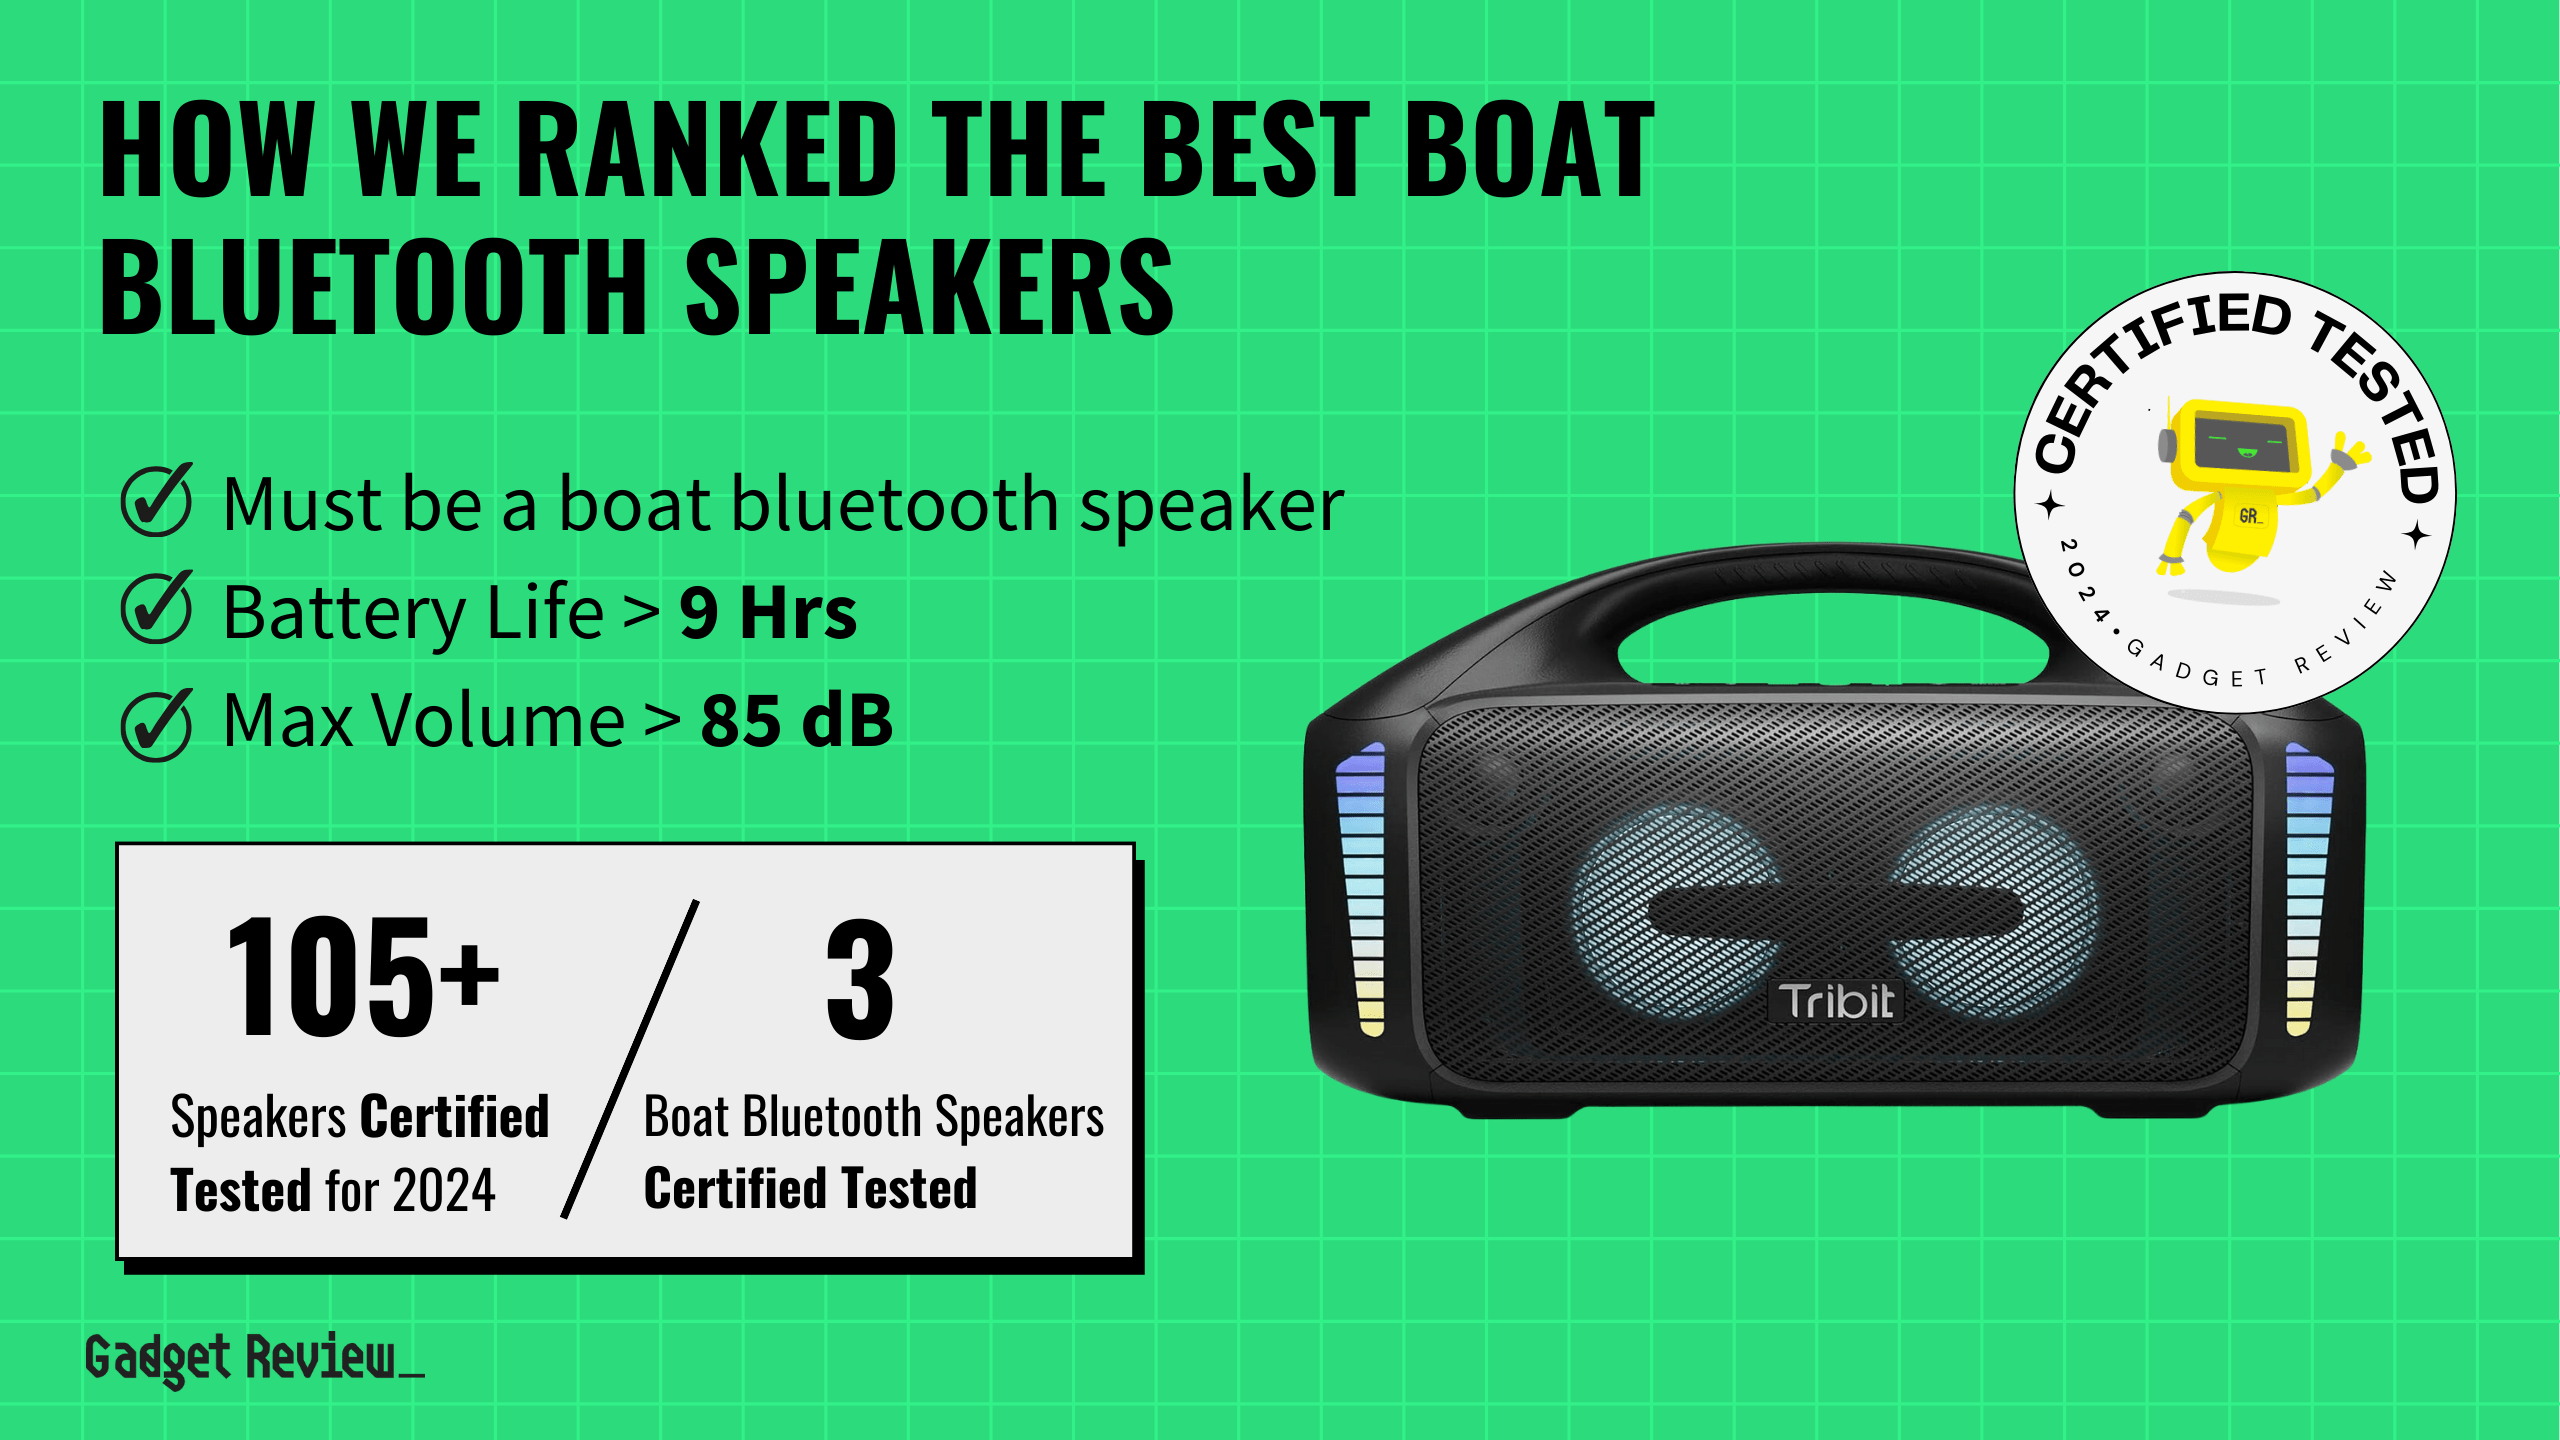 best boat bluetooth speaker guide that shows the top best bluetooth speaker model